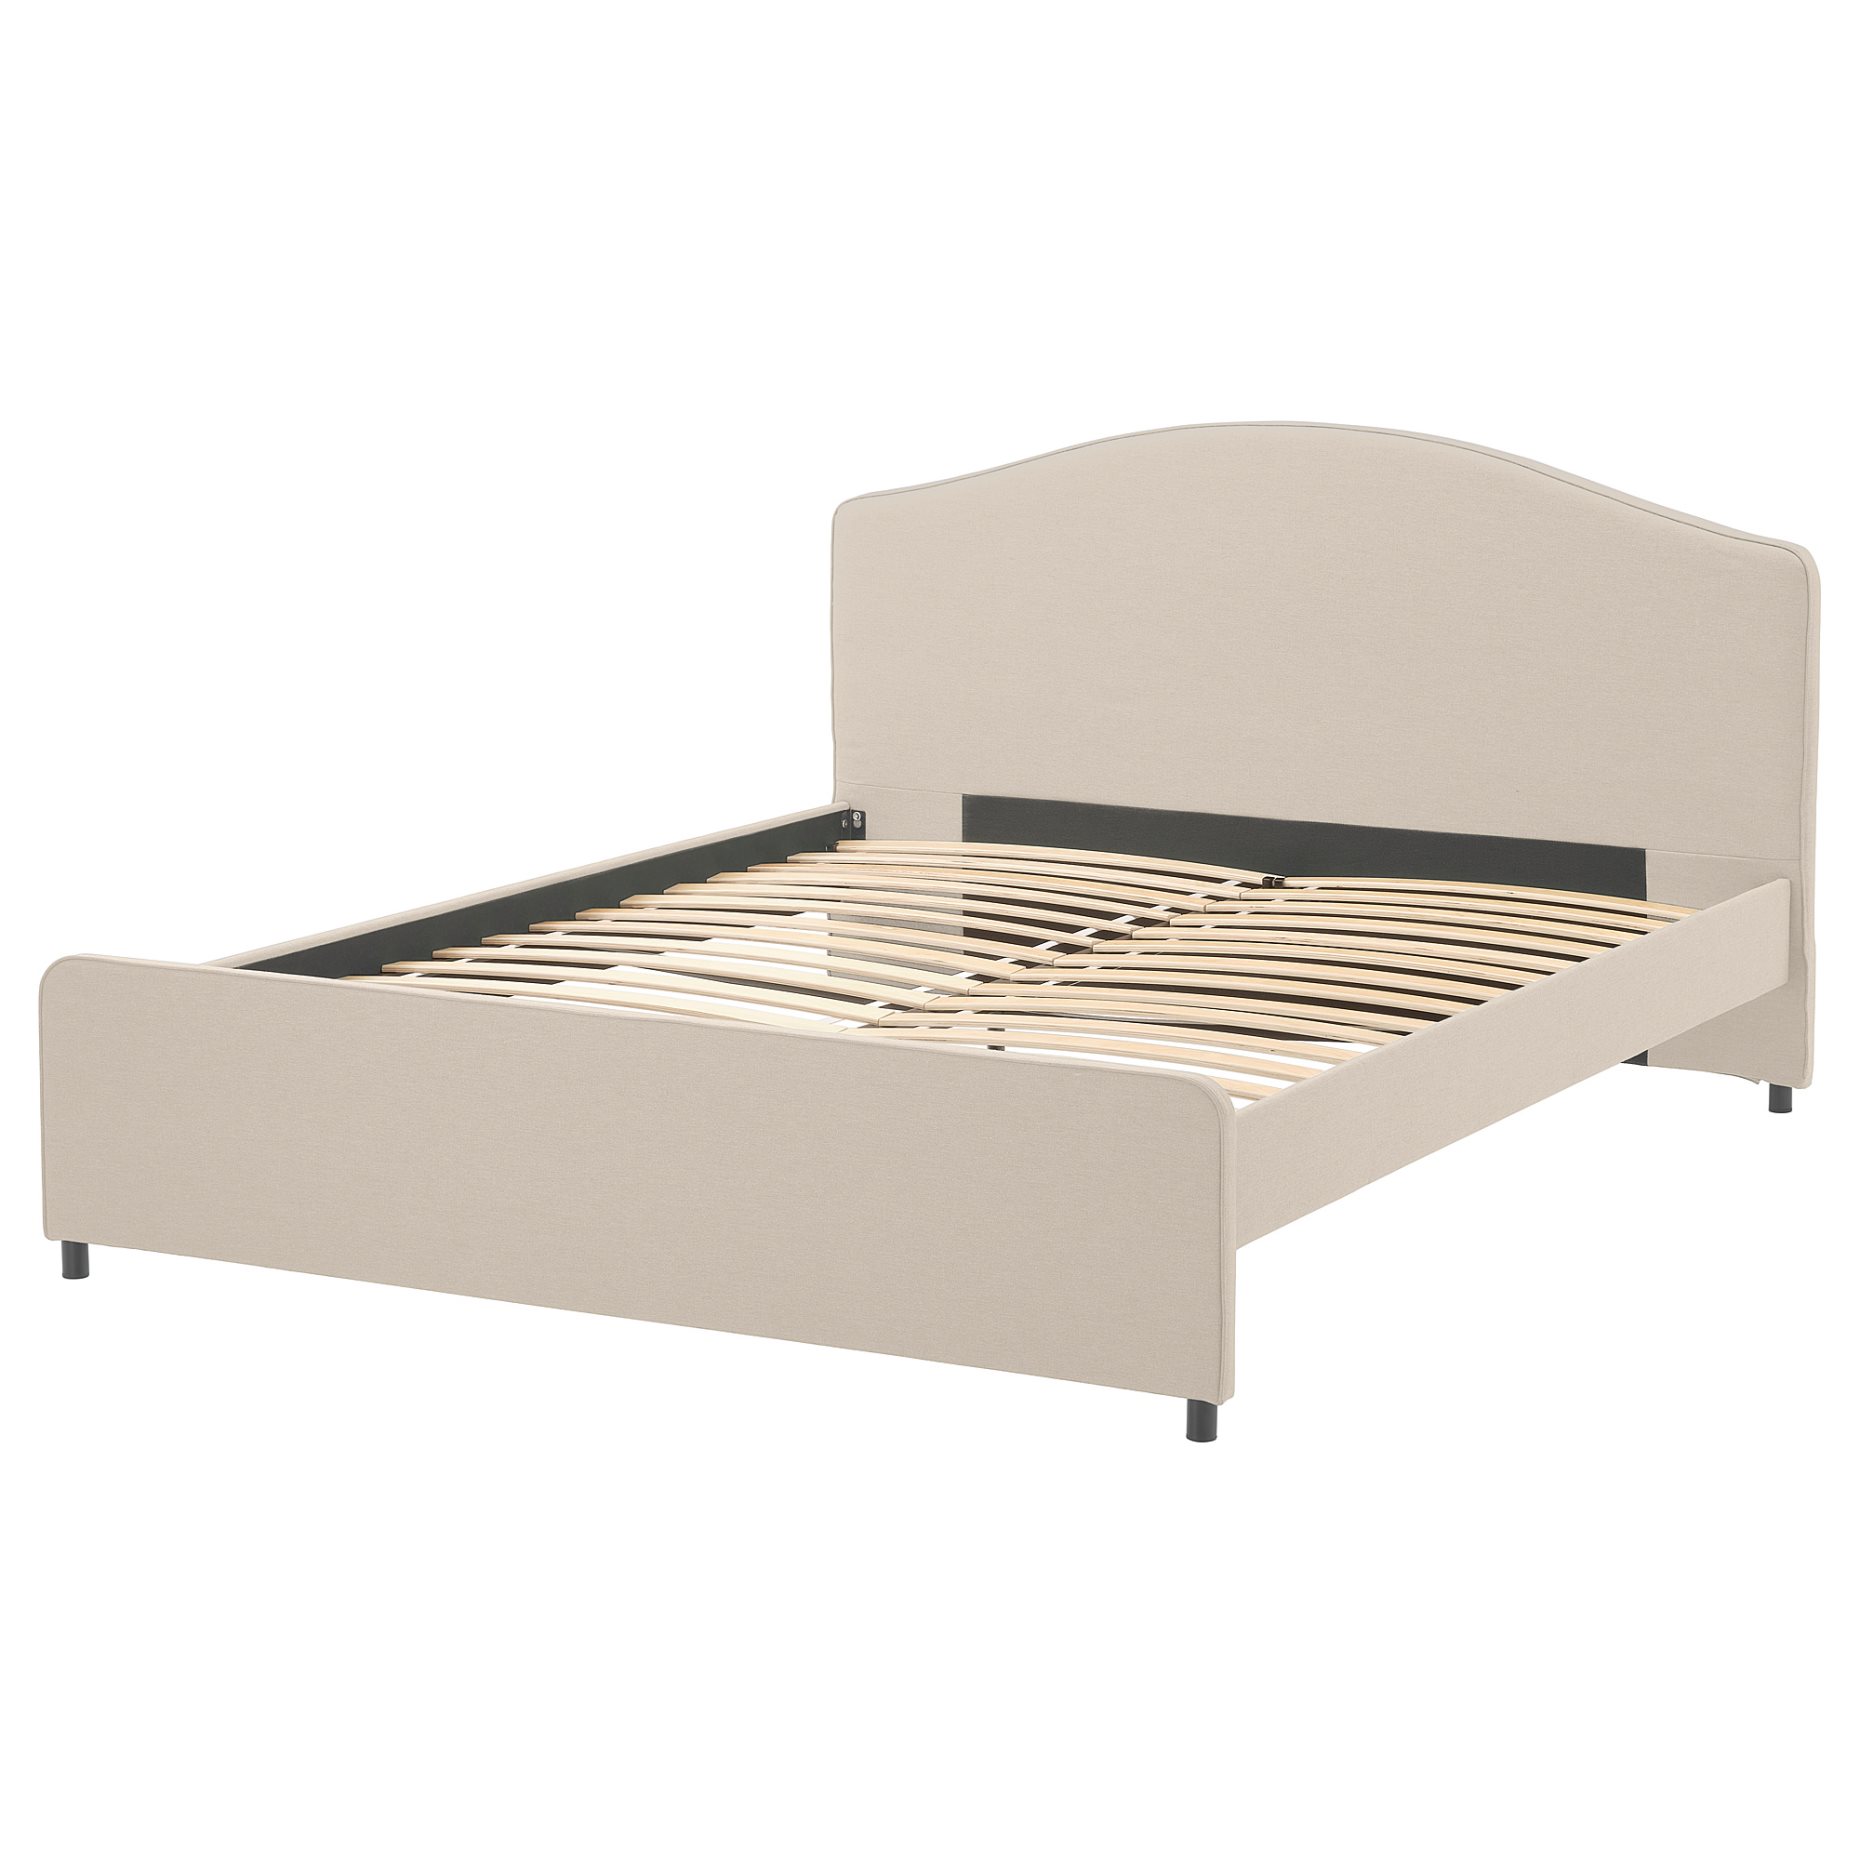 HAUGA, upholstered bed, 160x200 cm, 504.463.29